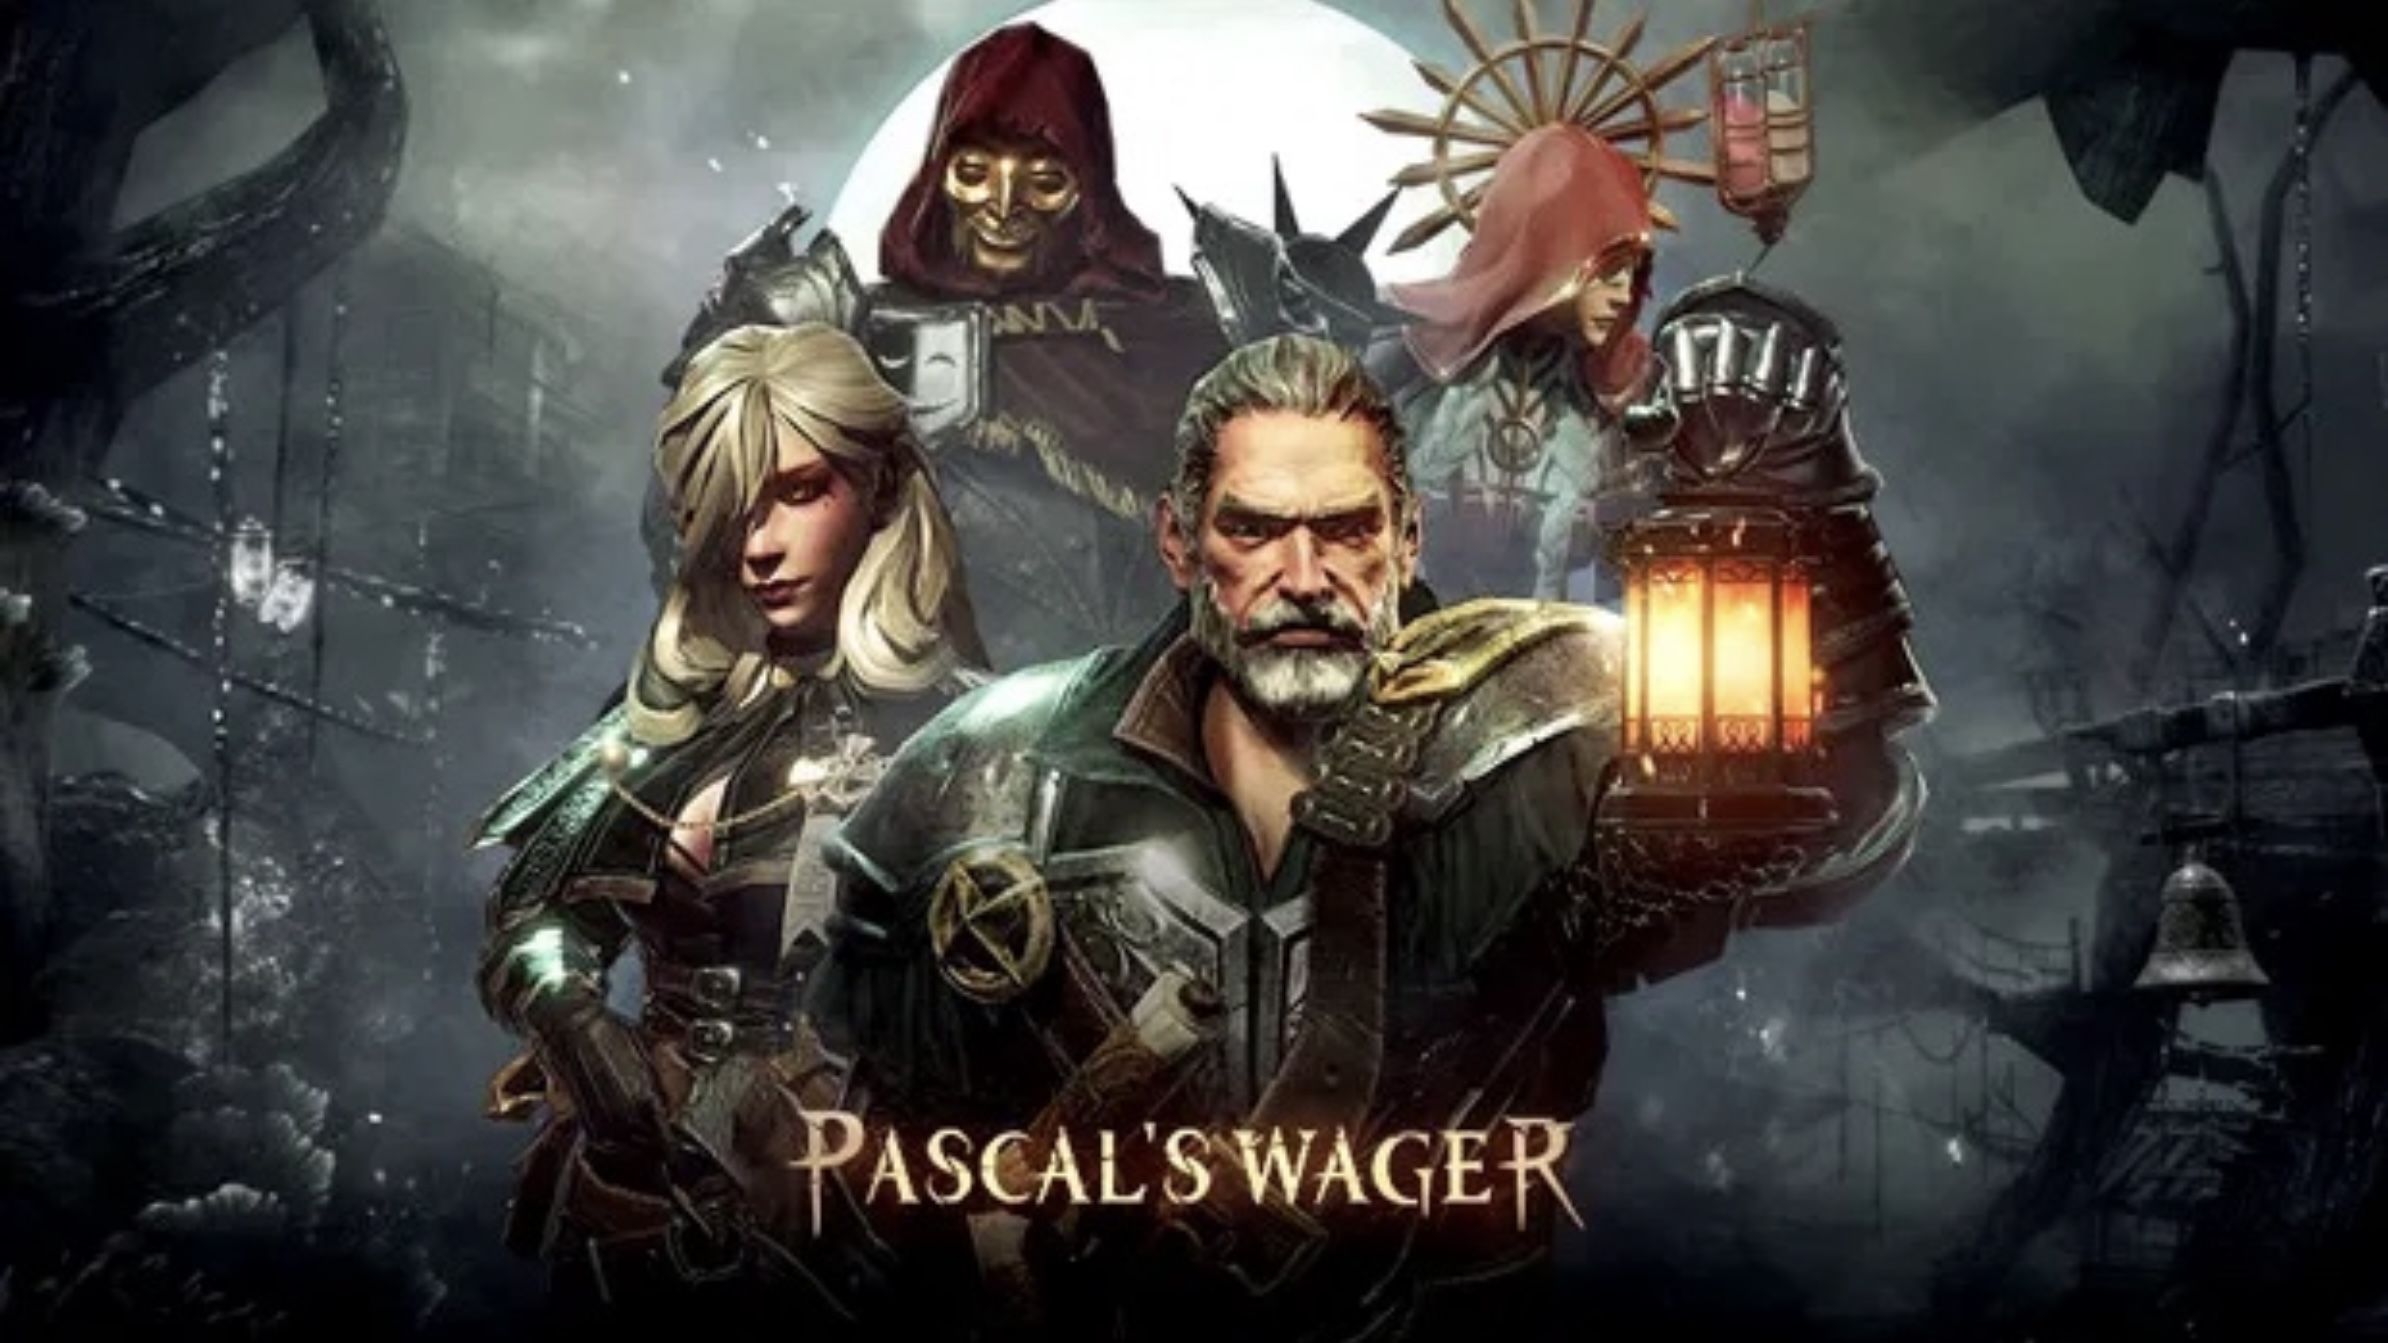 Pascal s wager на русском. Pascal's Wager: Definitive Edition. Pascal Wager Android. Pascal's Wager на ПК. Pascal's Wager Definitive Edition Нинтендо.